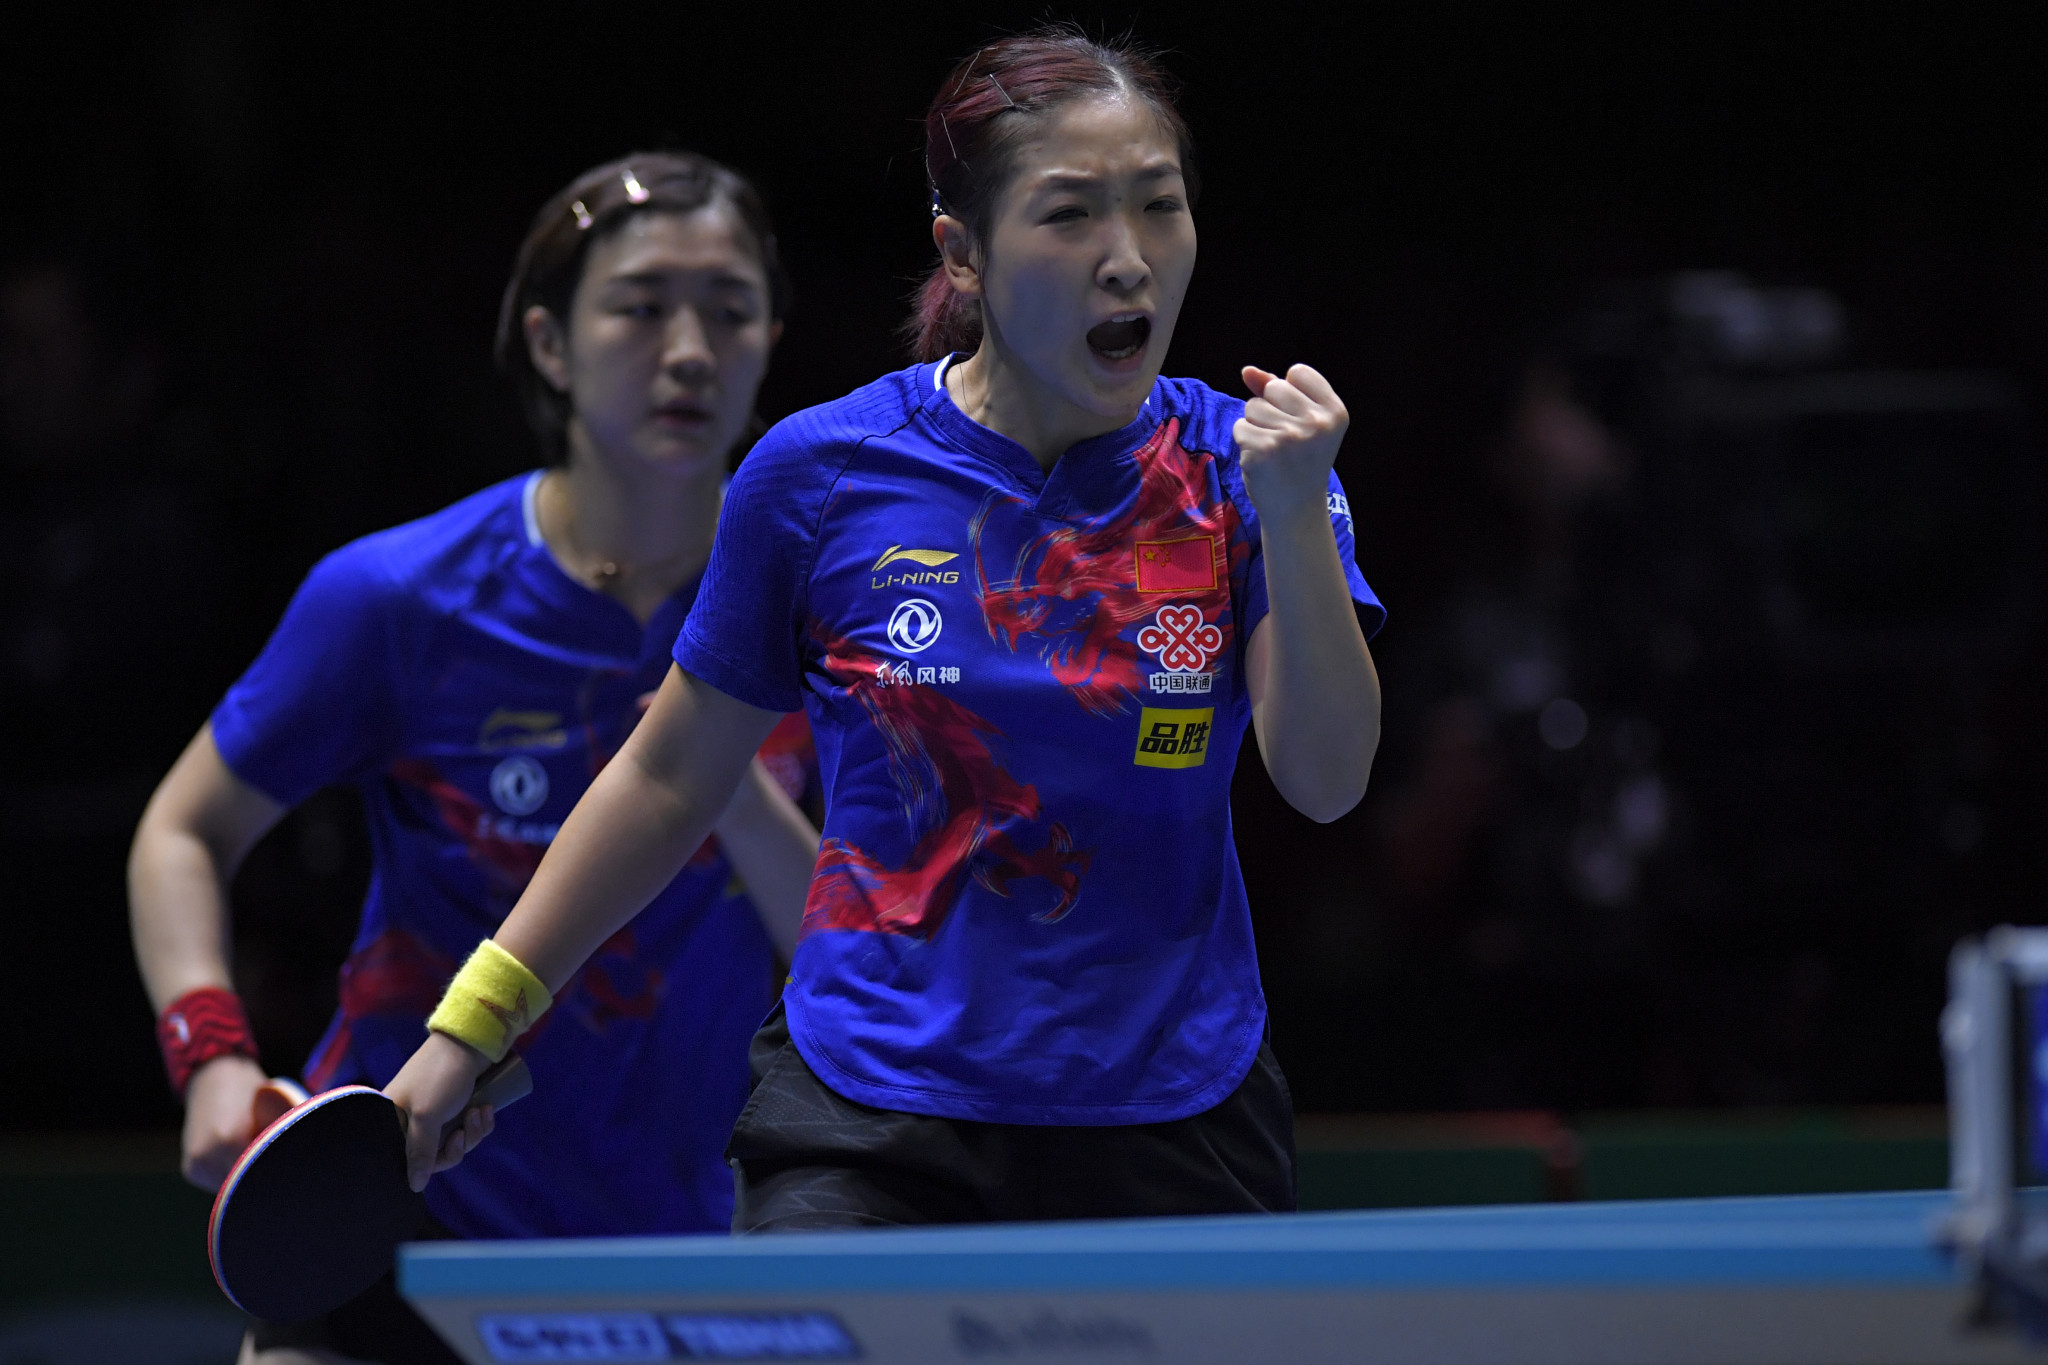 World champion overlooked for singles at Tokyo 2020 as China names table tennis squad